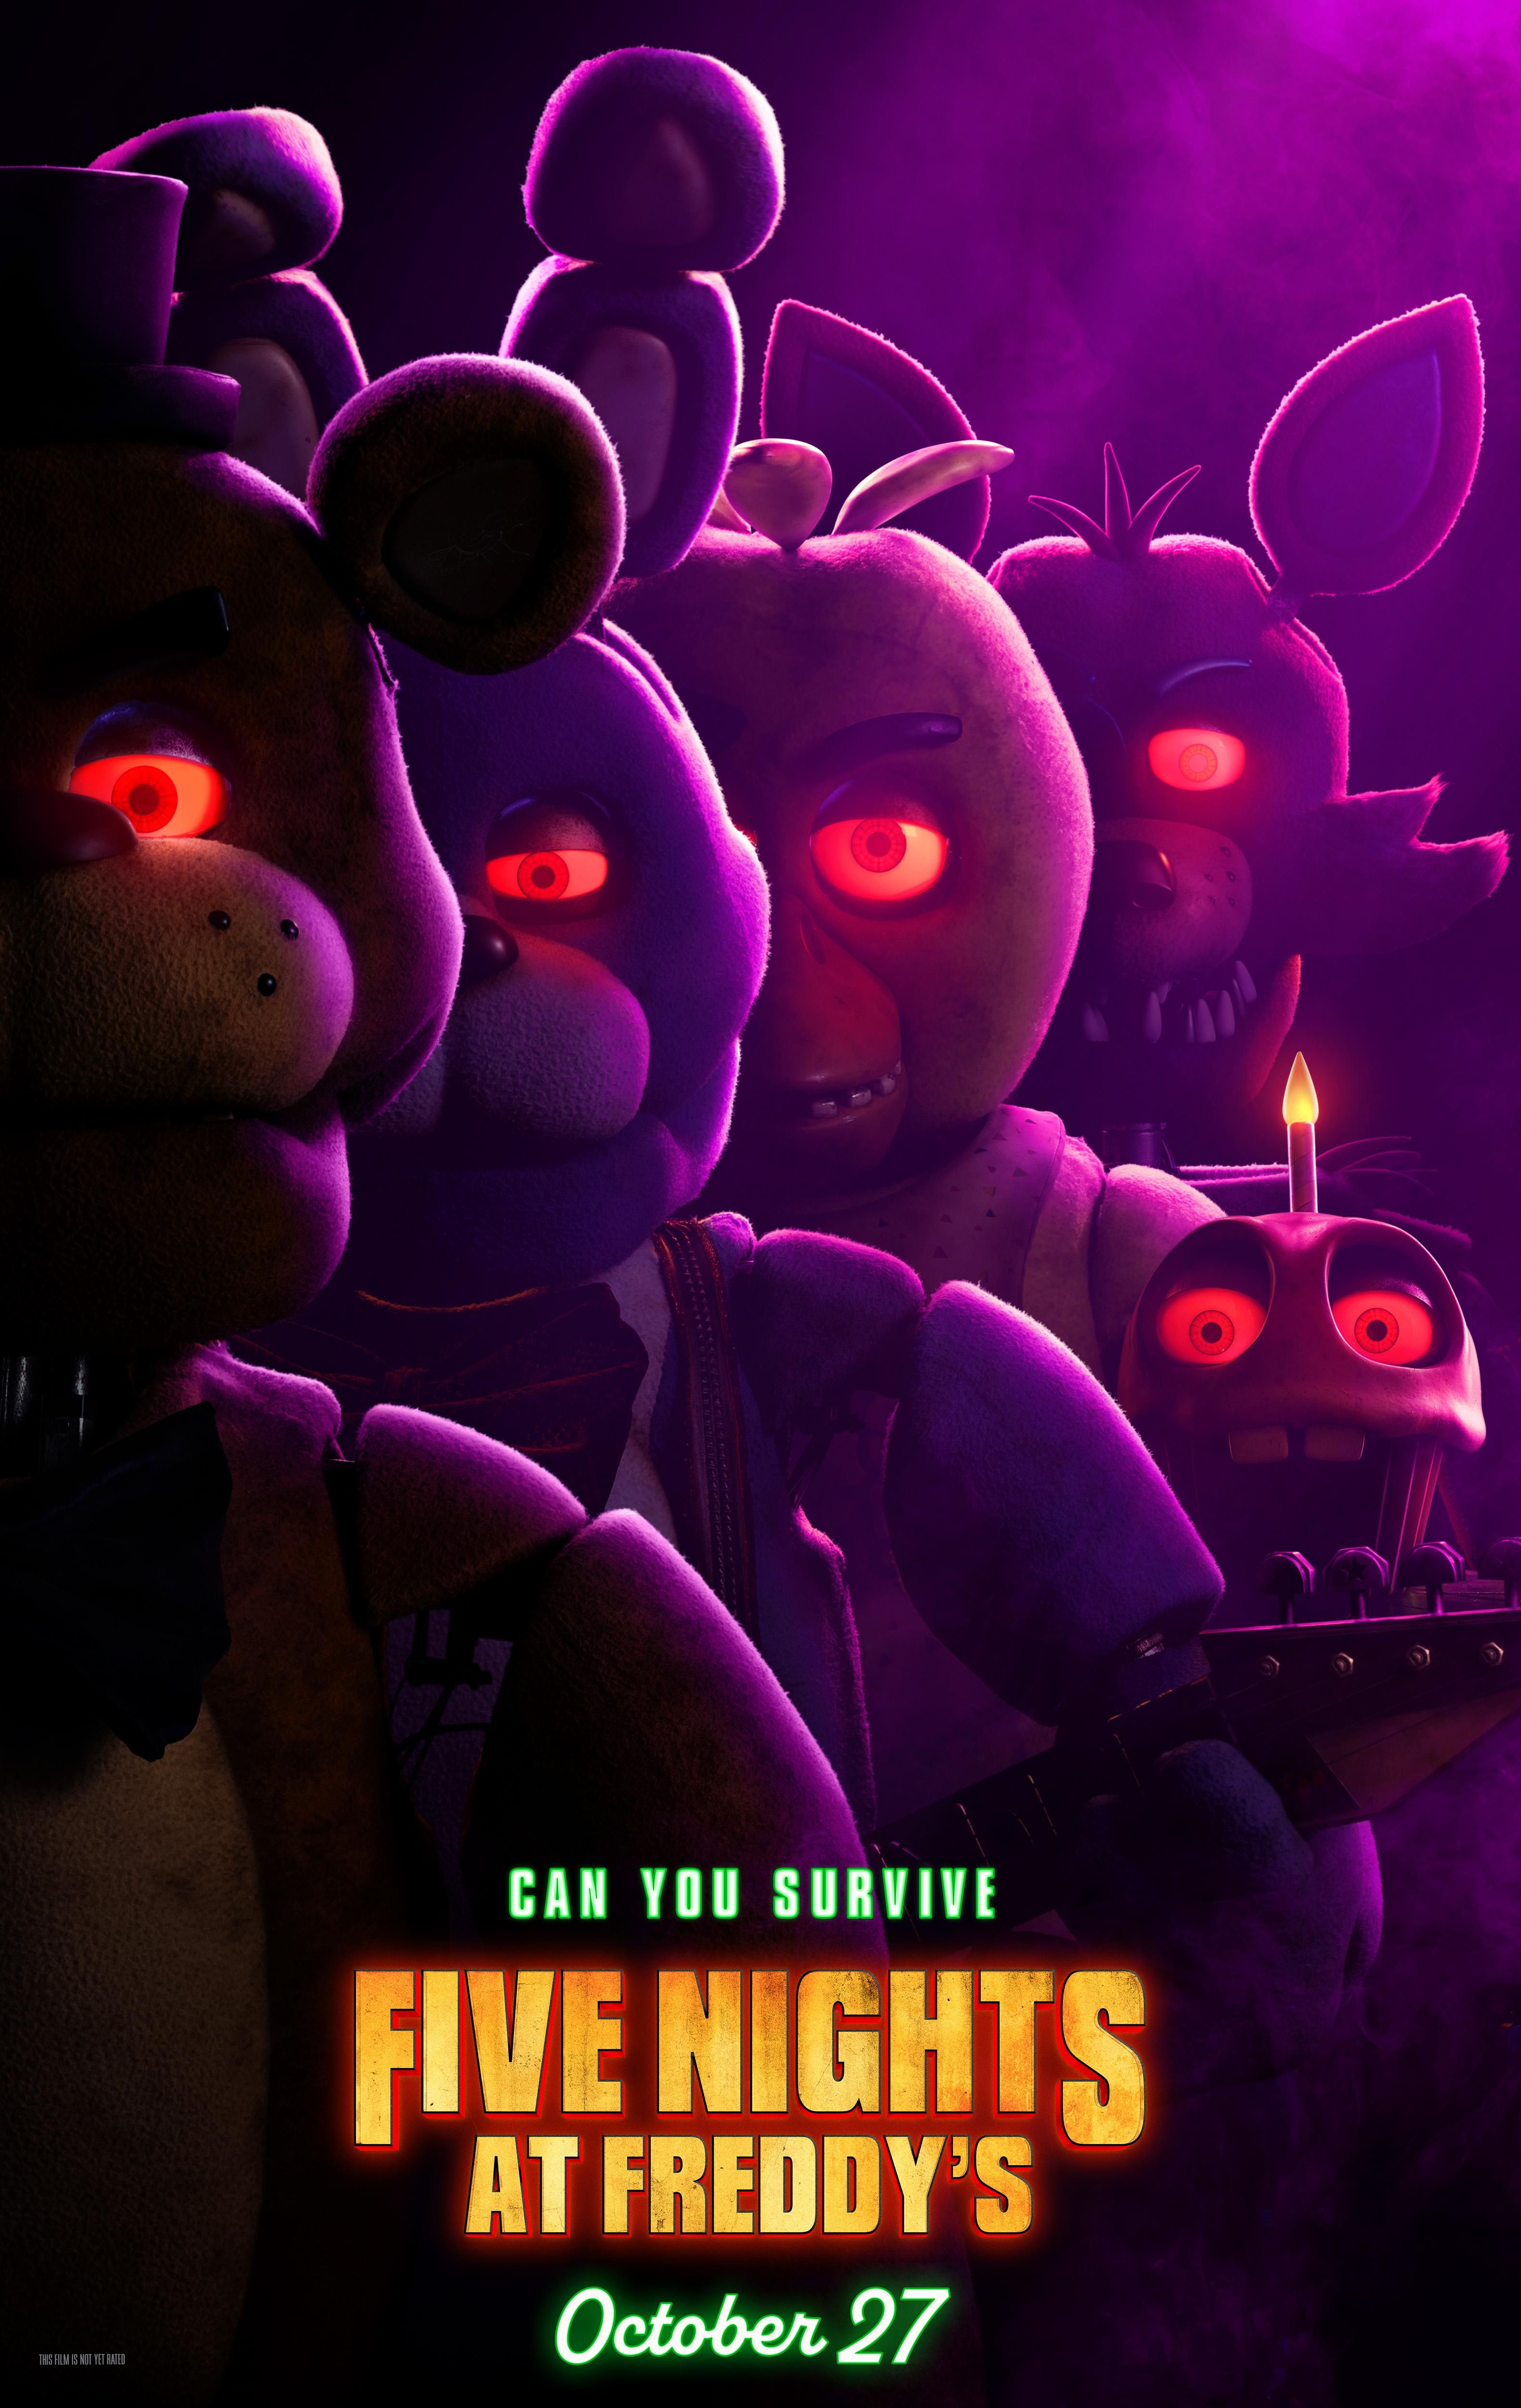 found this is fnaf 1 on camera 2b. the game after i got golden freddy  poster. i looked at it then it disappeared after i went back to it. :  r/fnaftheories